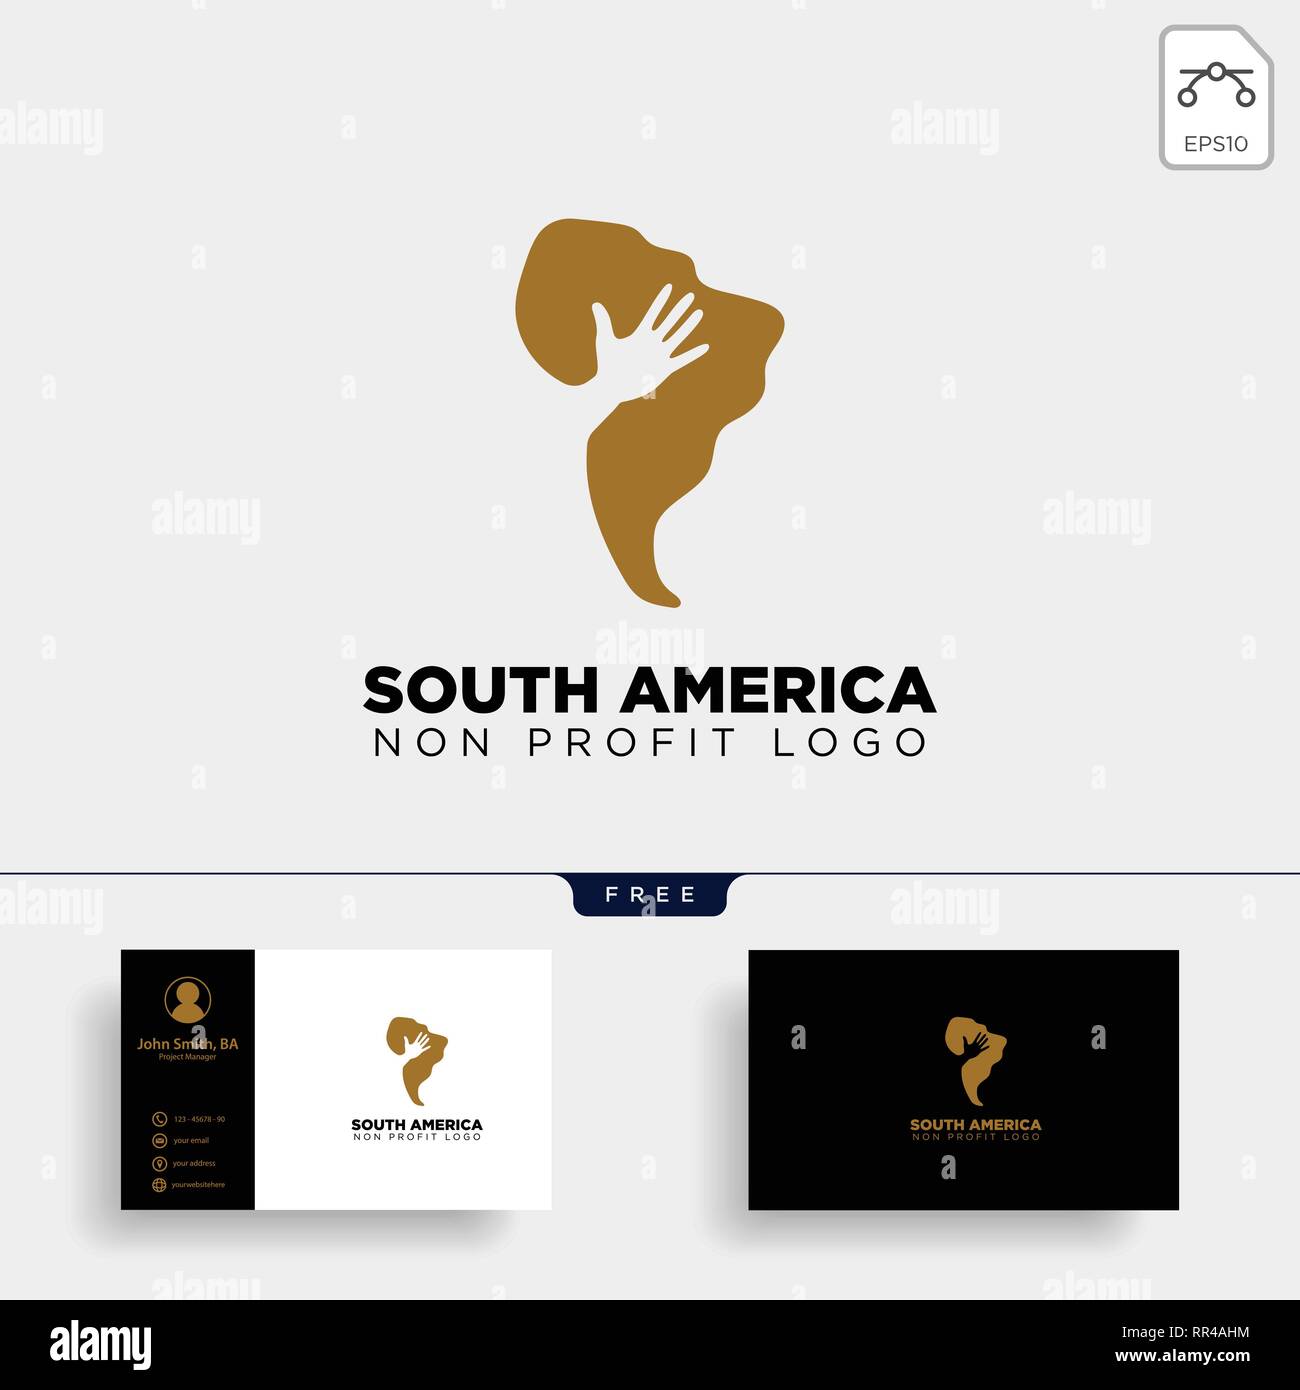 south africa charity logo template vector illustration icon element isolated - vector Stock Vector